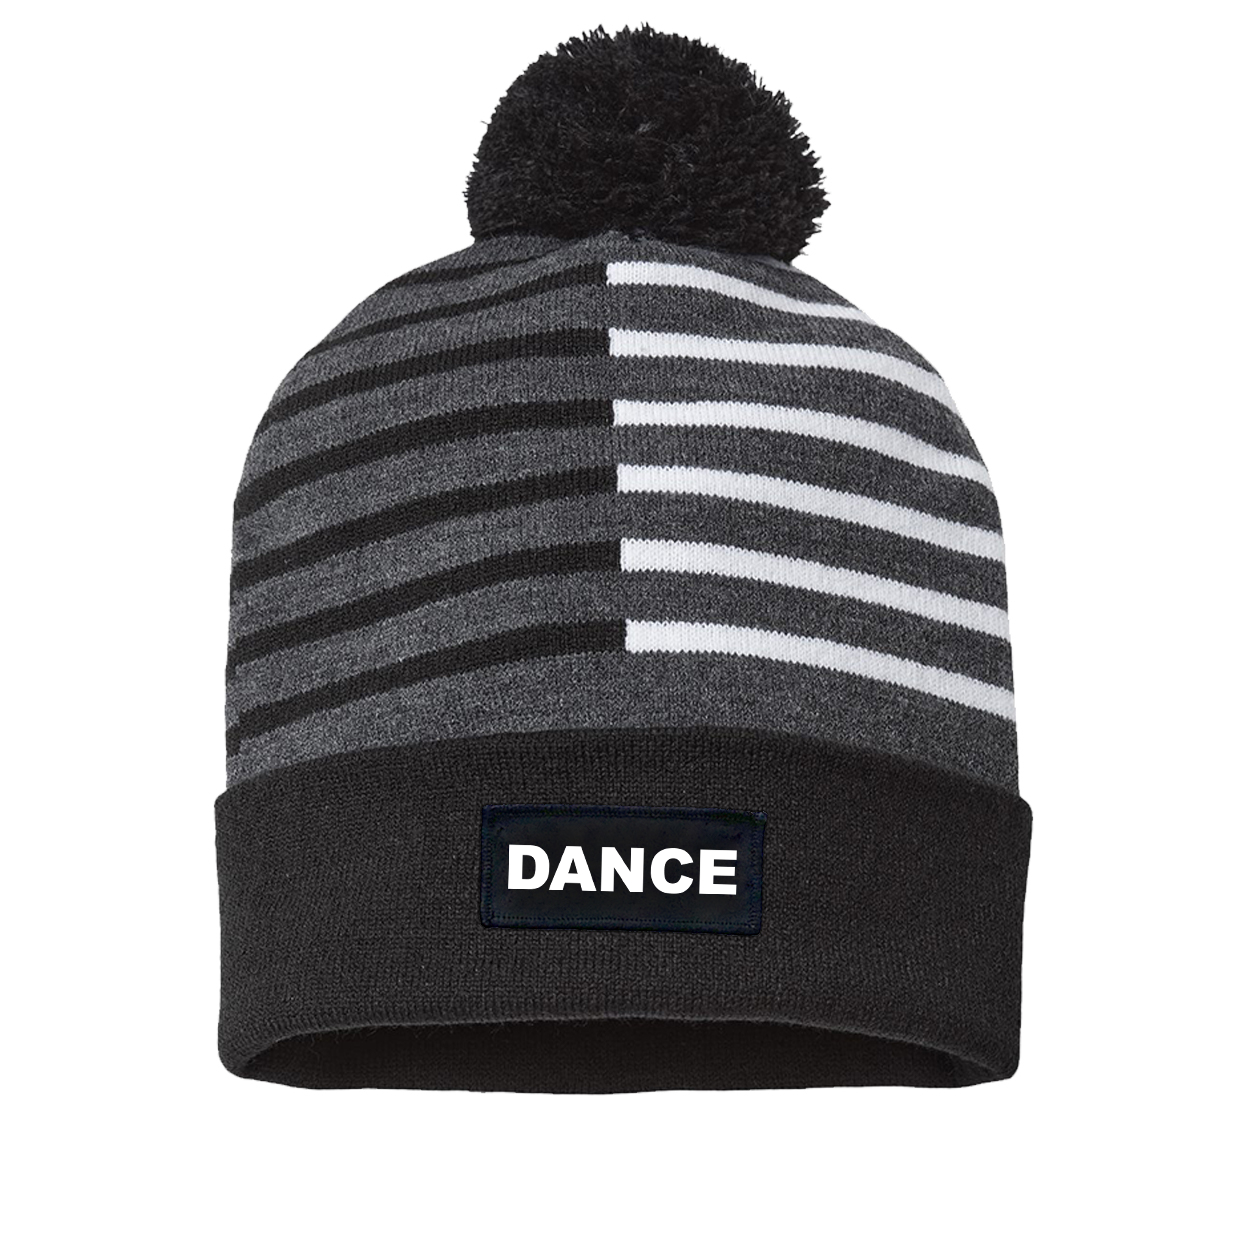 Dance Brand Logo Night Out Woven Patch Roll Up Pom Knit Beanie Half Color Black/White (White Logo)